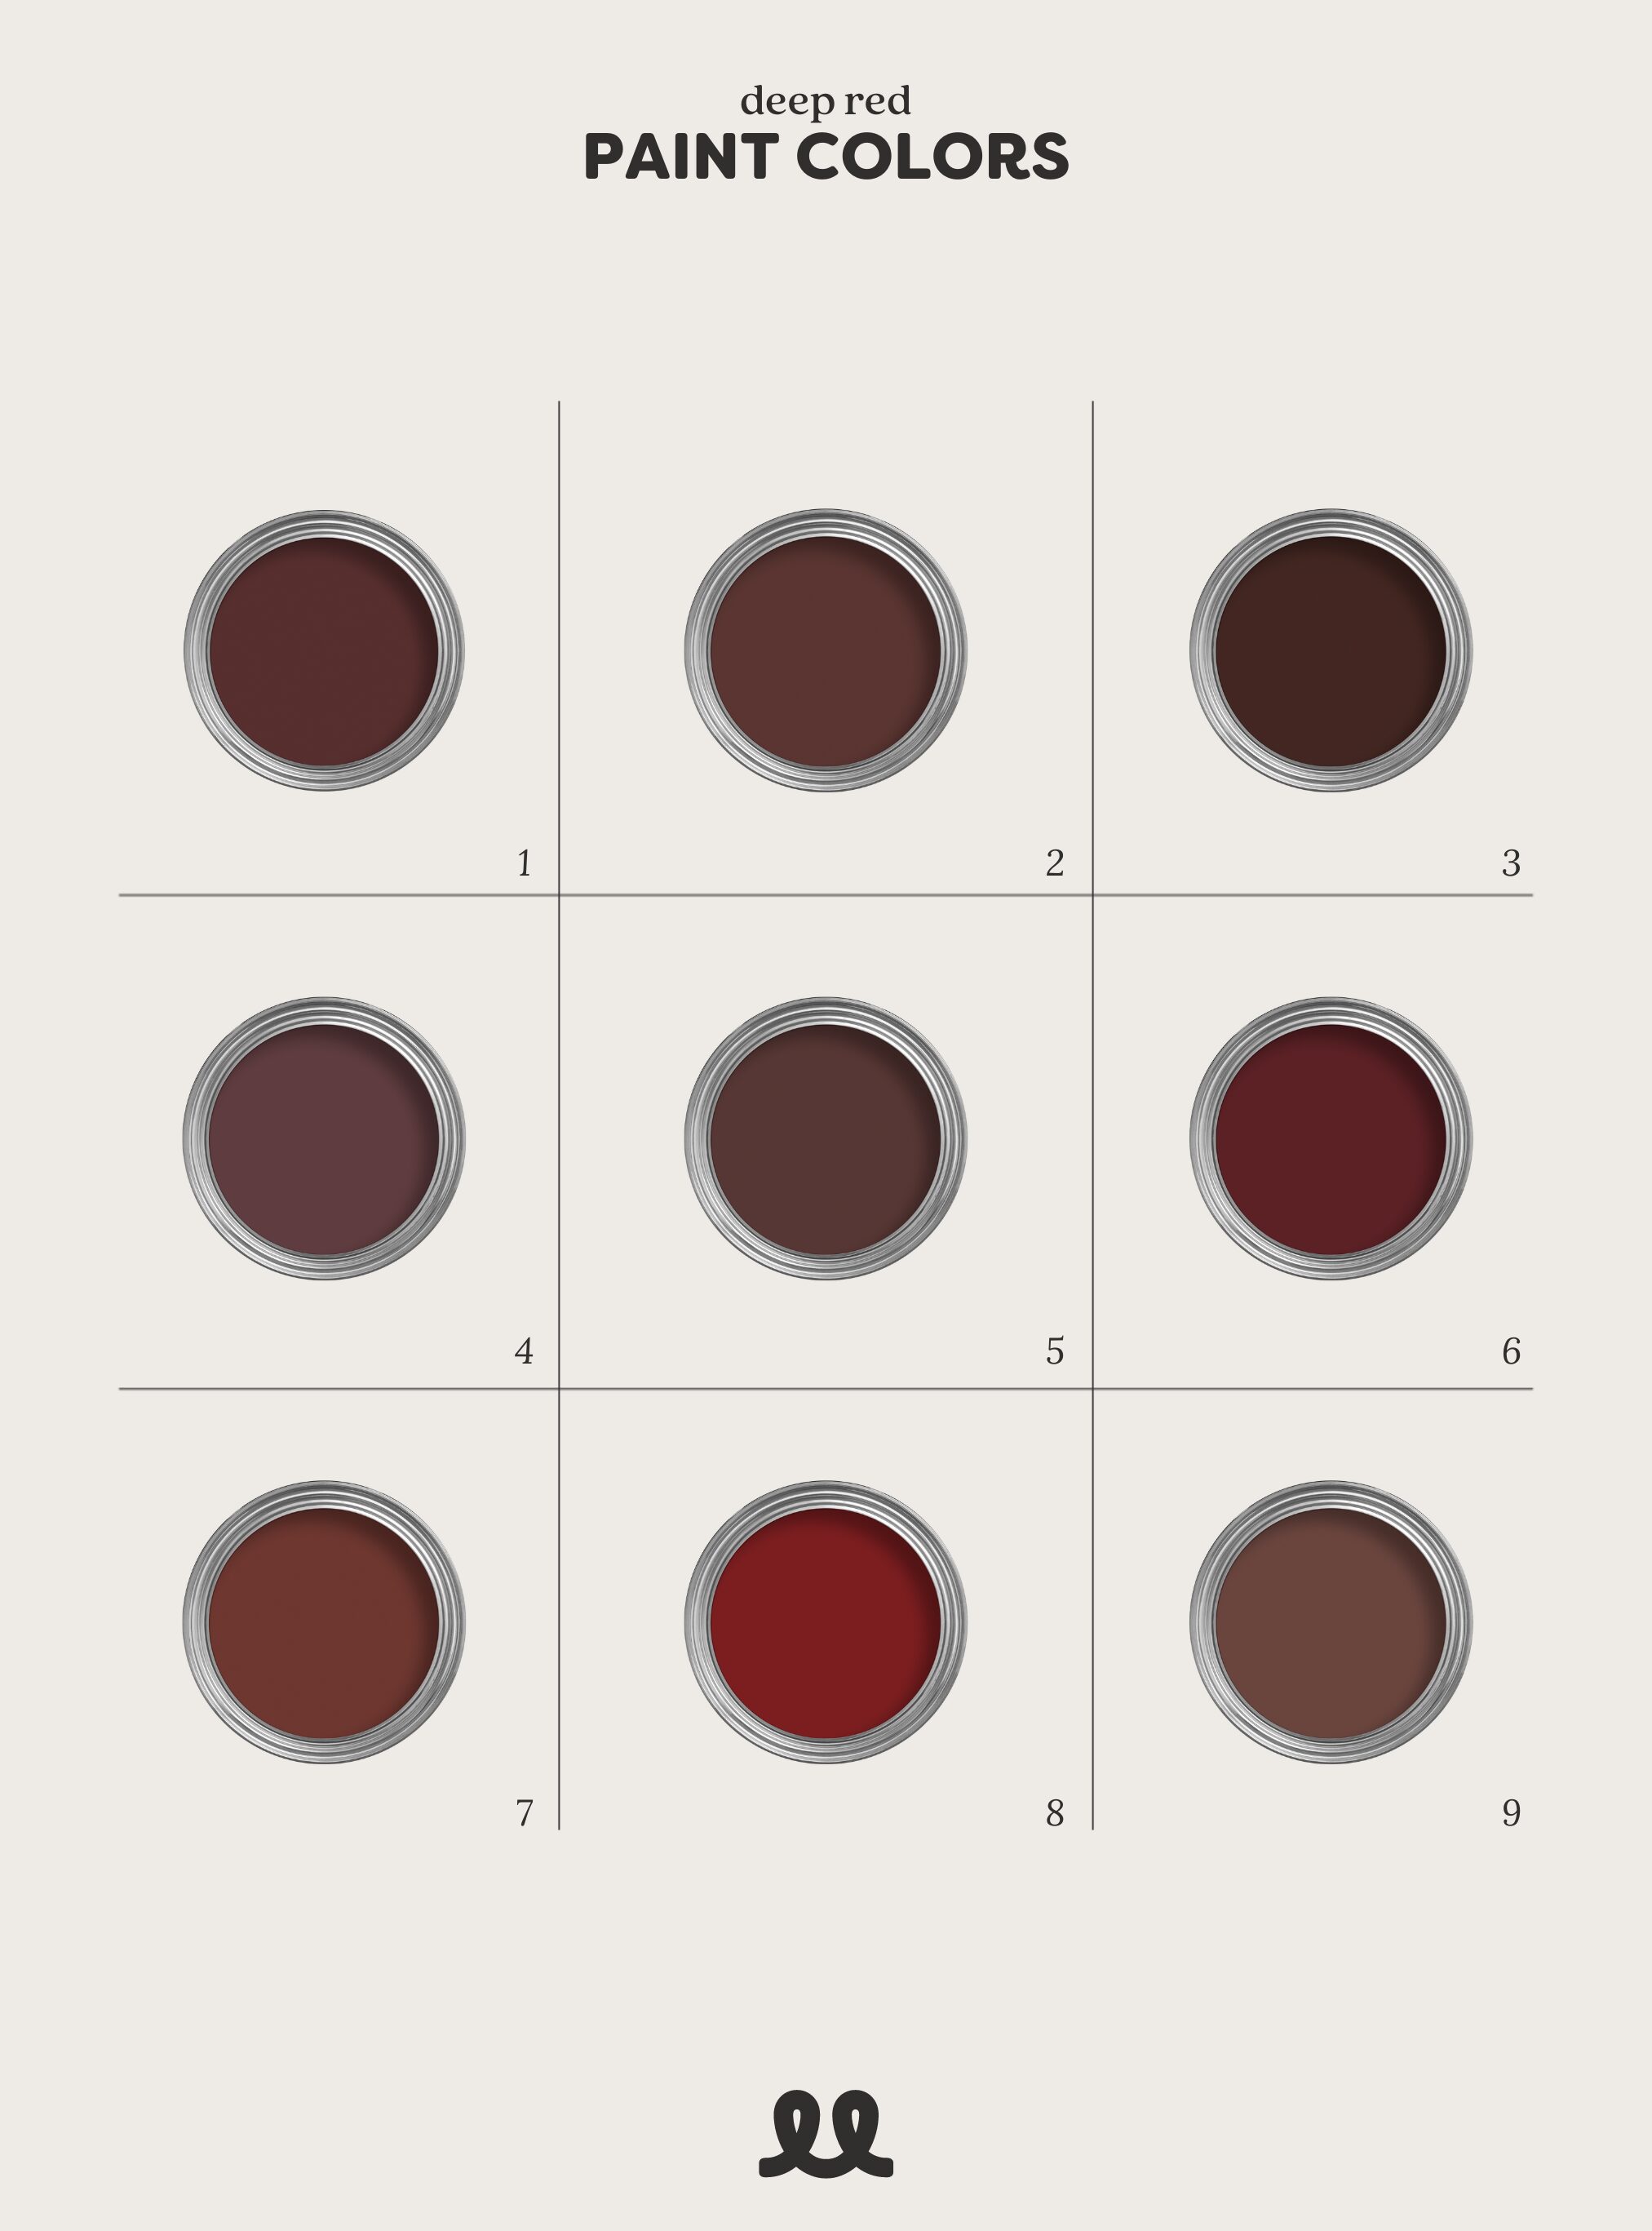 deep red paint color samples on a grid by yellowbrickhome